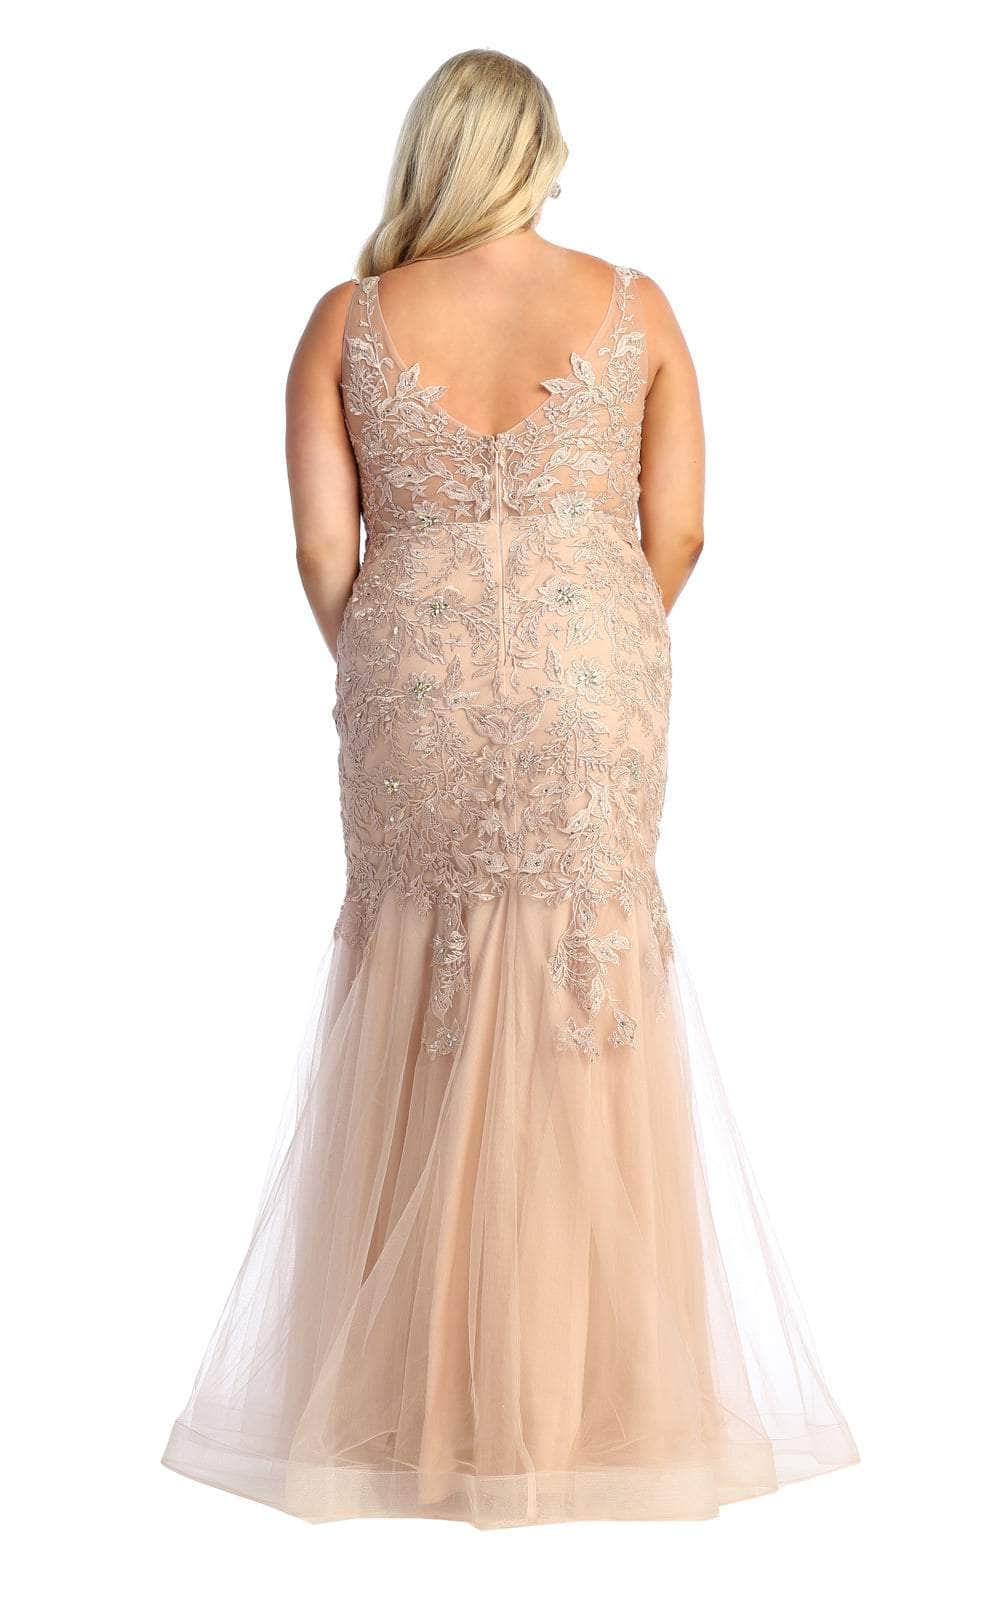 May Queen RQ7947 - Embroidered Trumpet Evening Dress Special Occasion Dress